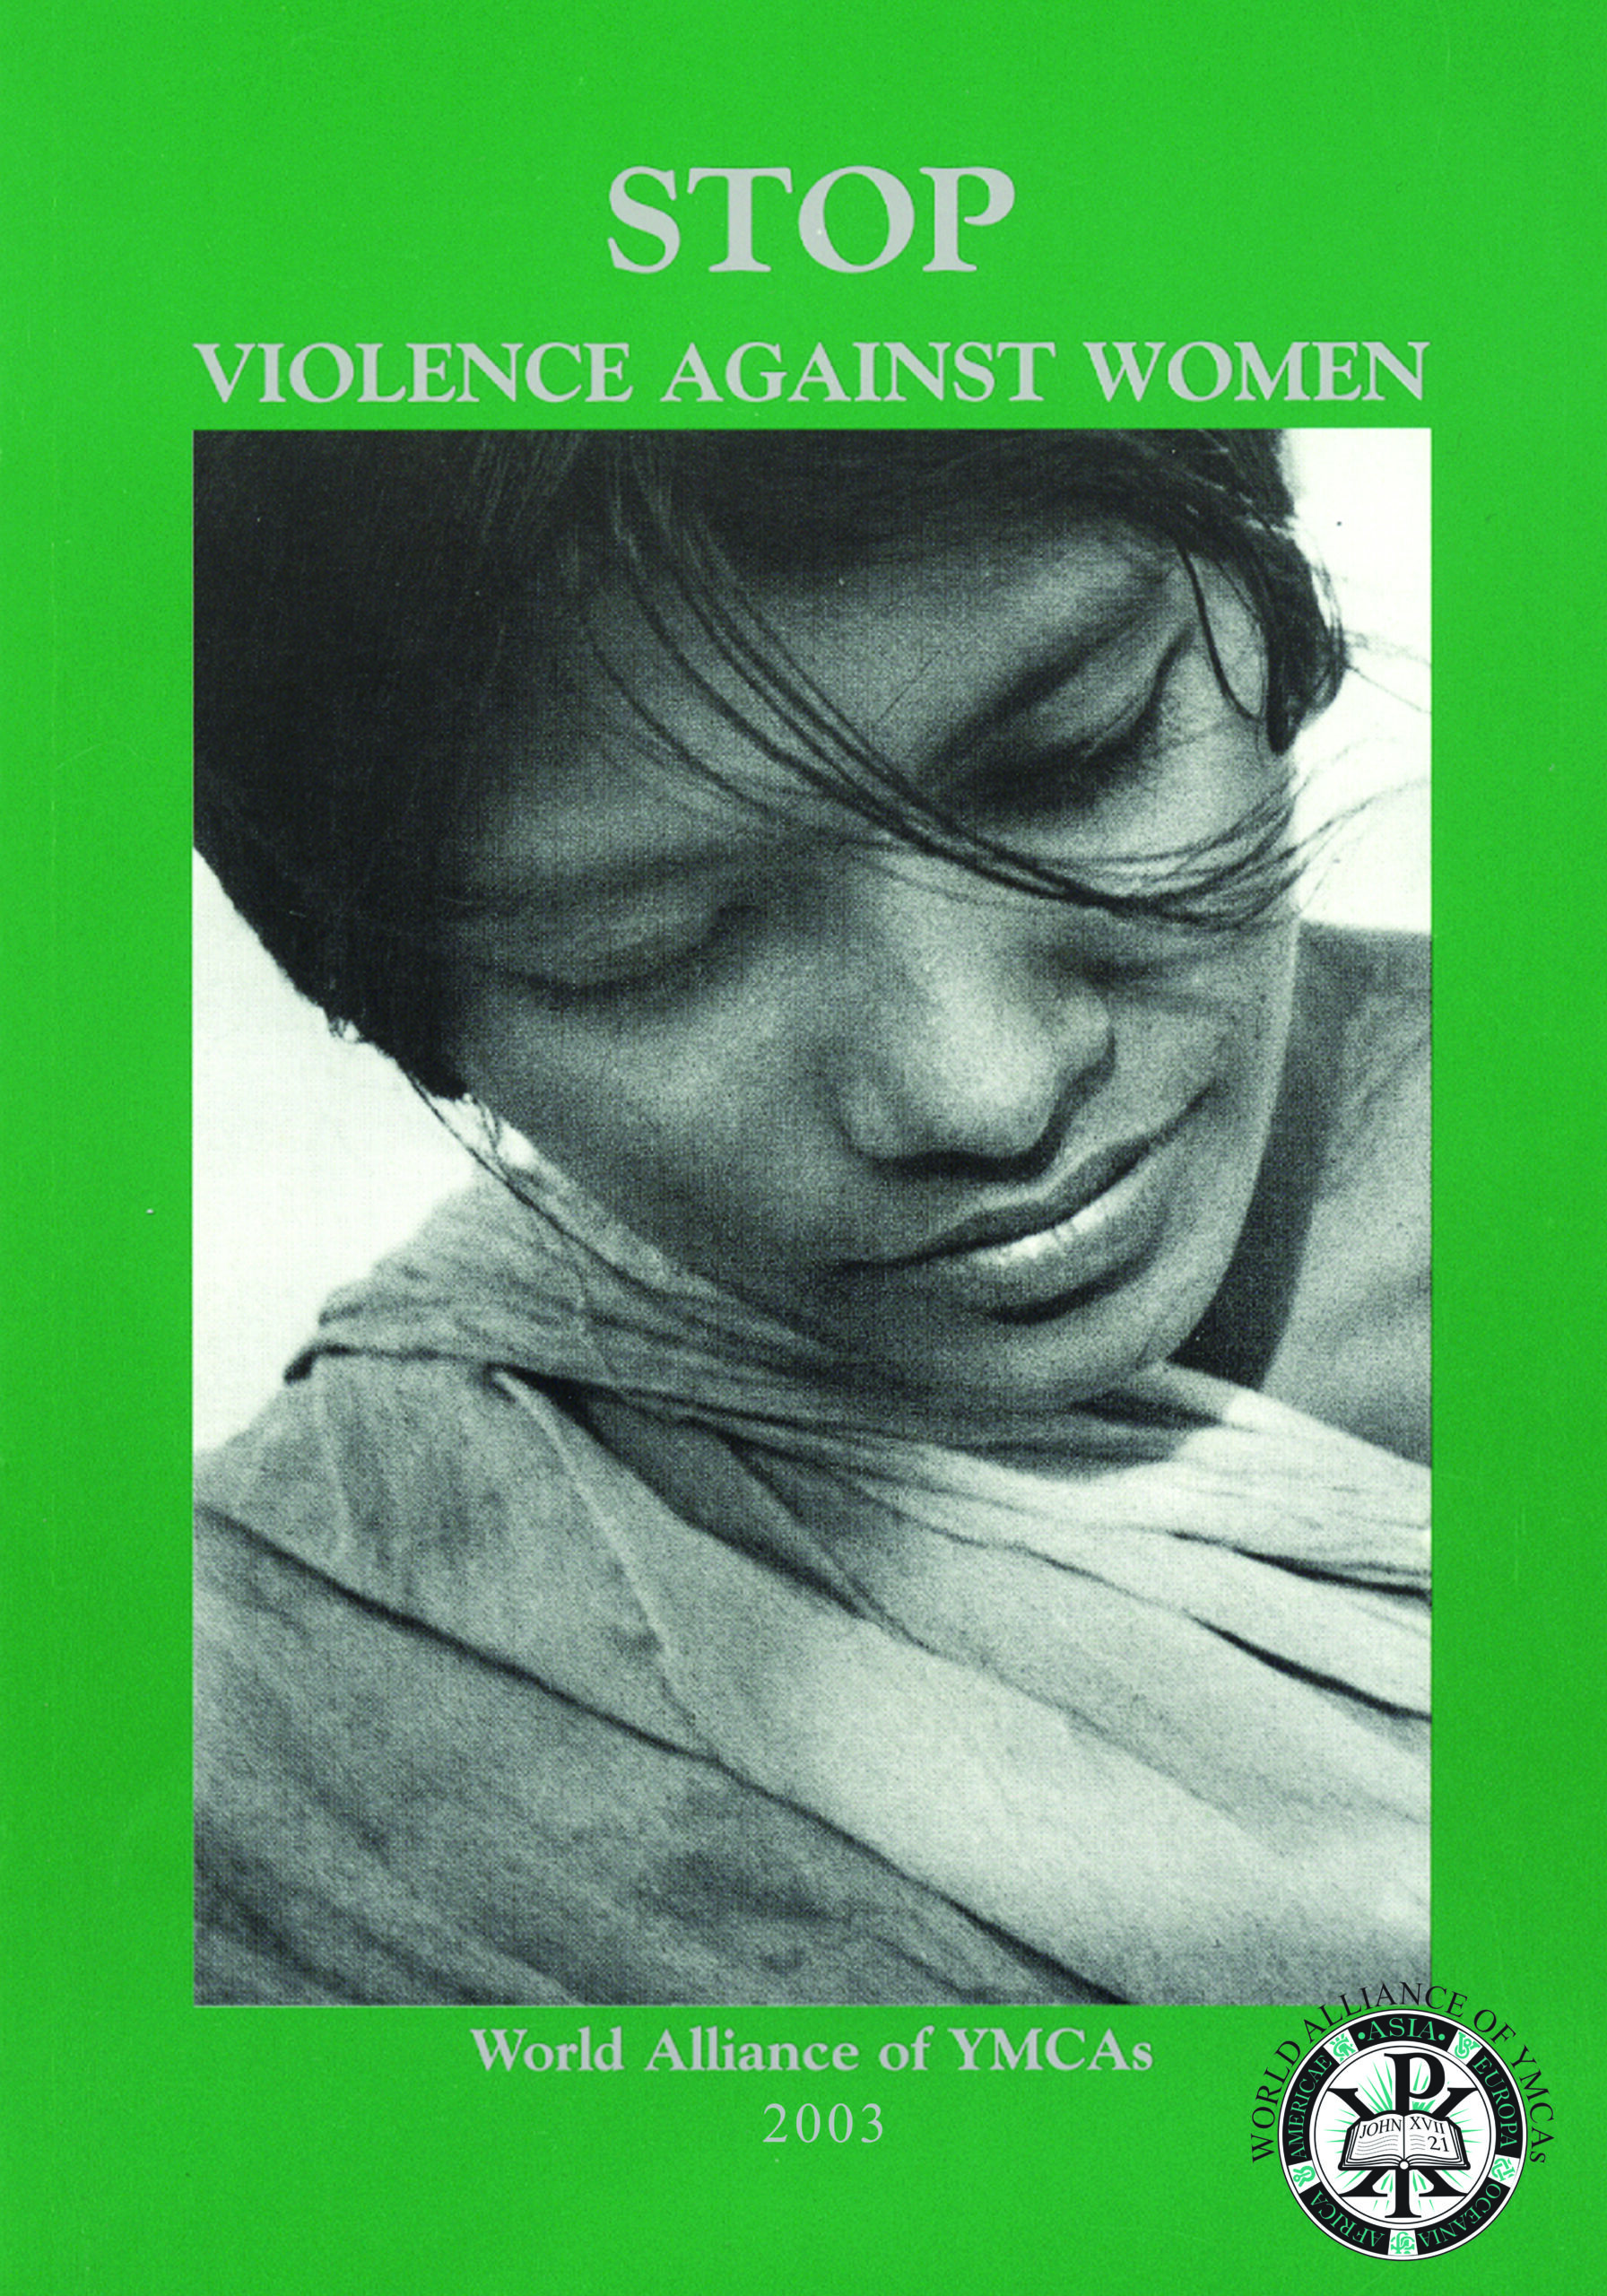 2003 The World YMCA calls for an end to violence against women